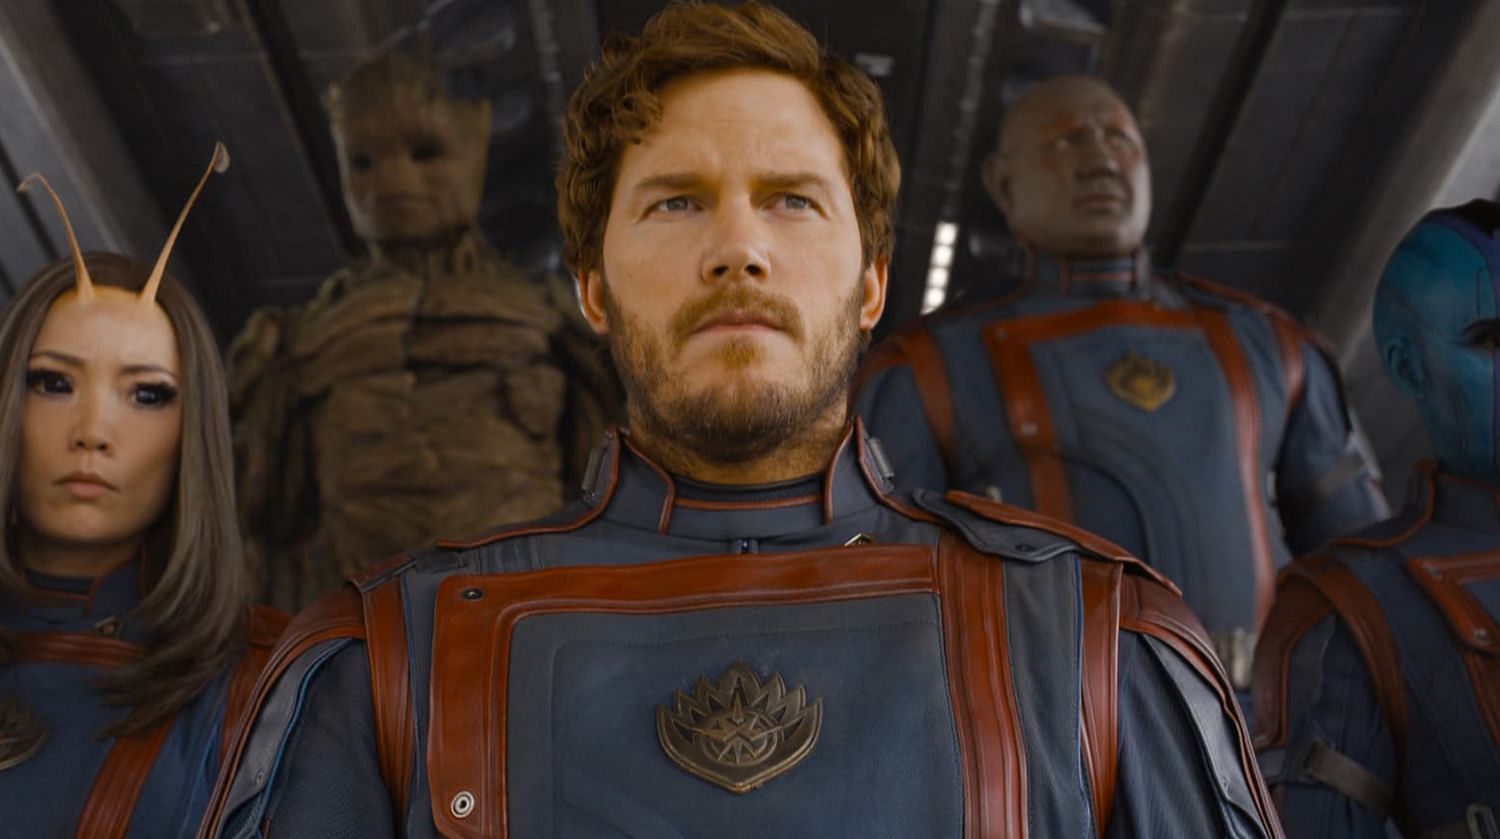 The inclusion of the F-bomb in Guardians of the Galaxy Vol. 3 hints at the possibility of more mature language in future MCU films, despite the franchise&#039;s PG-13 rating (Image via Marvel Studios)